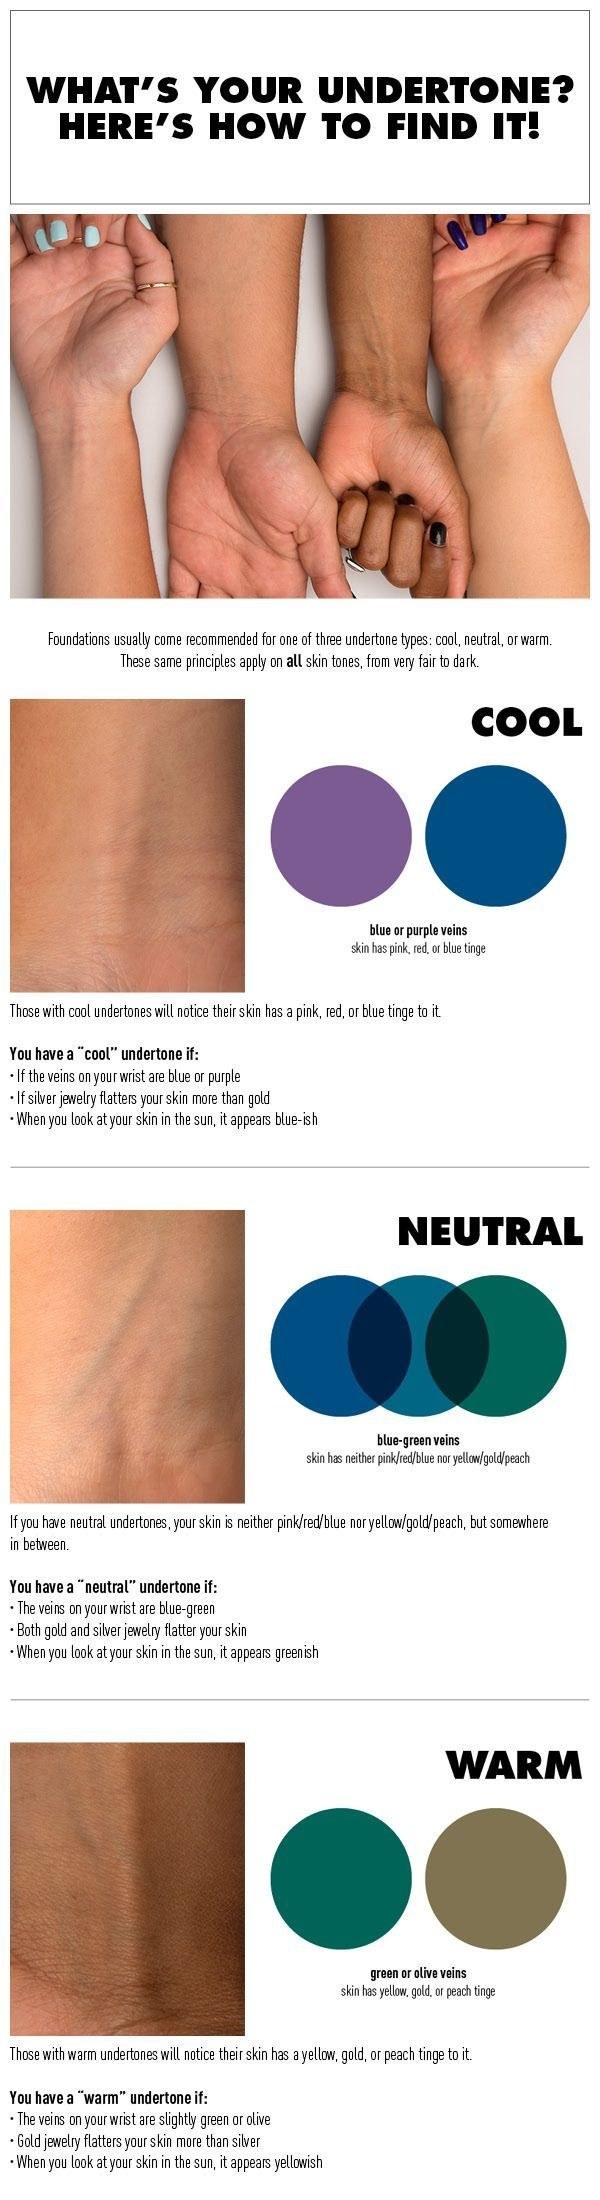 How to Know Your Undertone